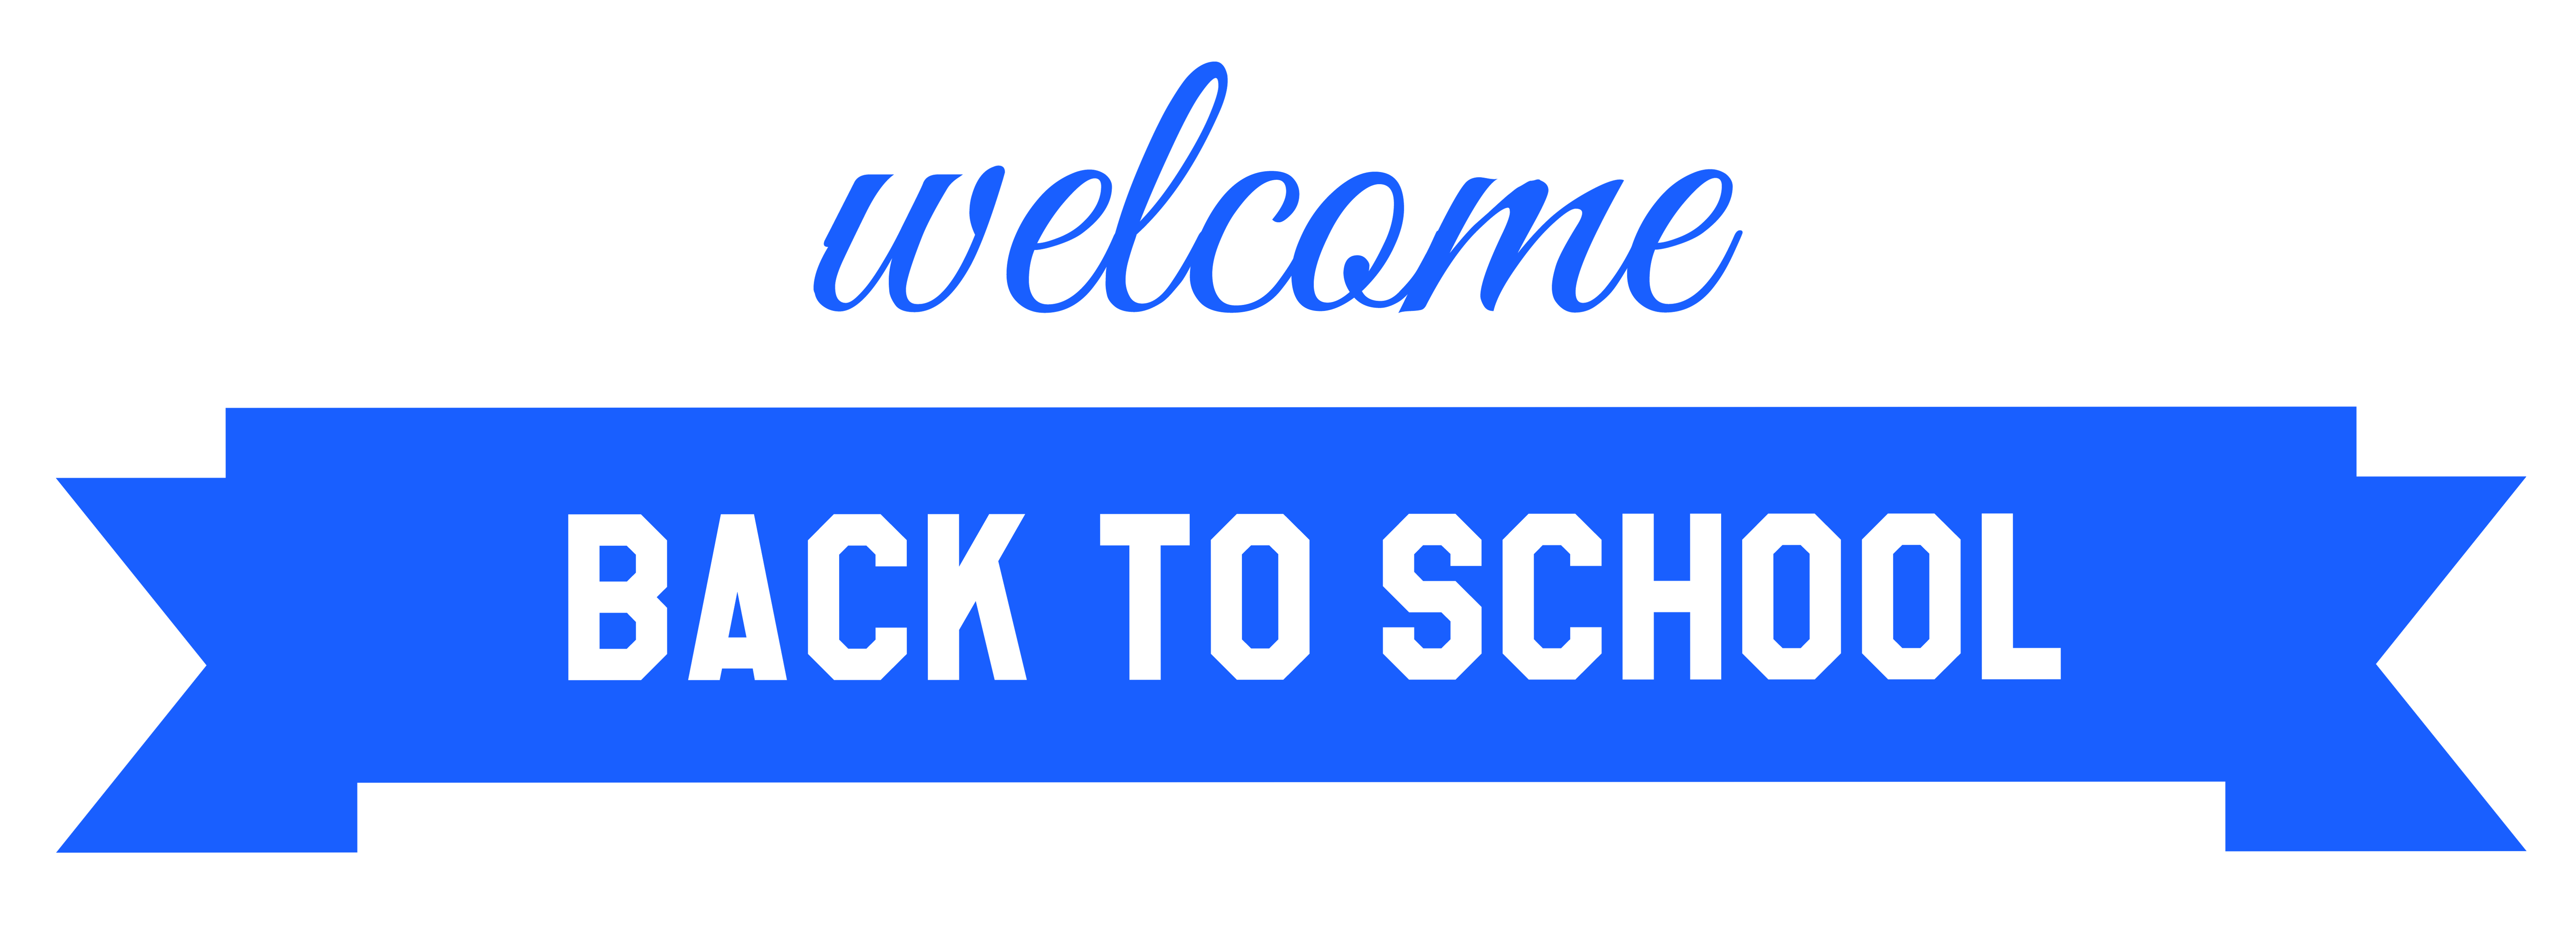 Blue Welcome Back to School Banner PNG Image 